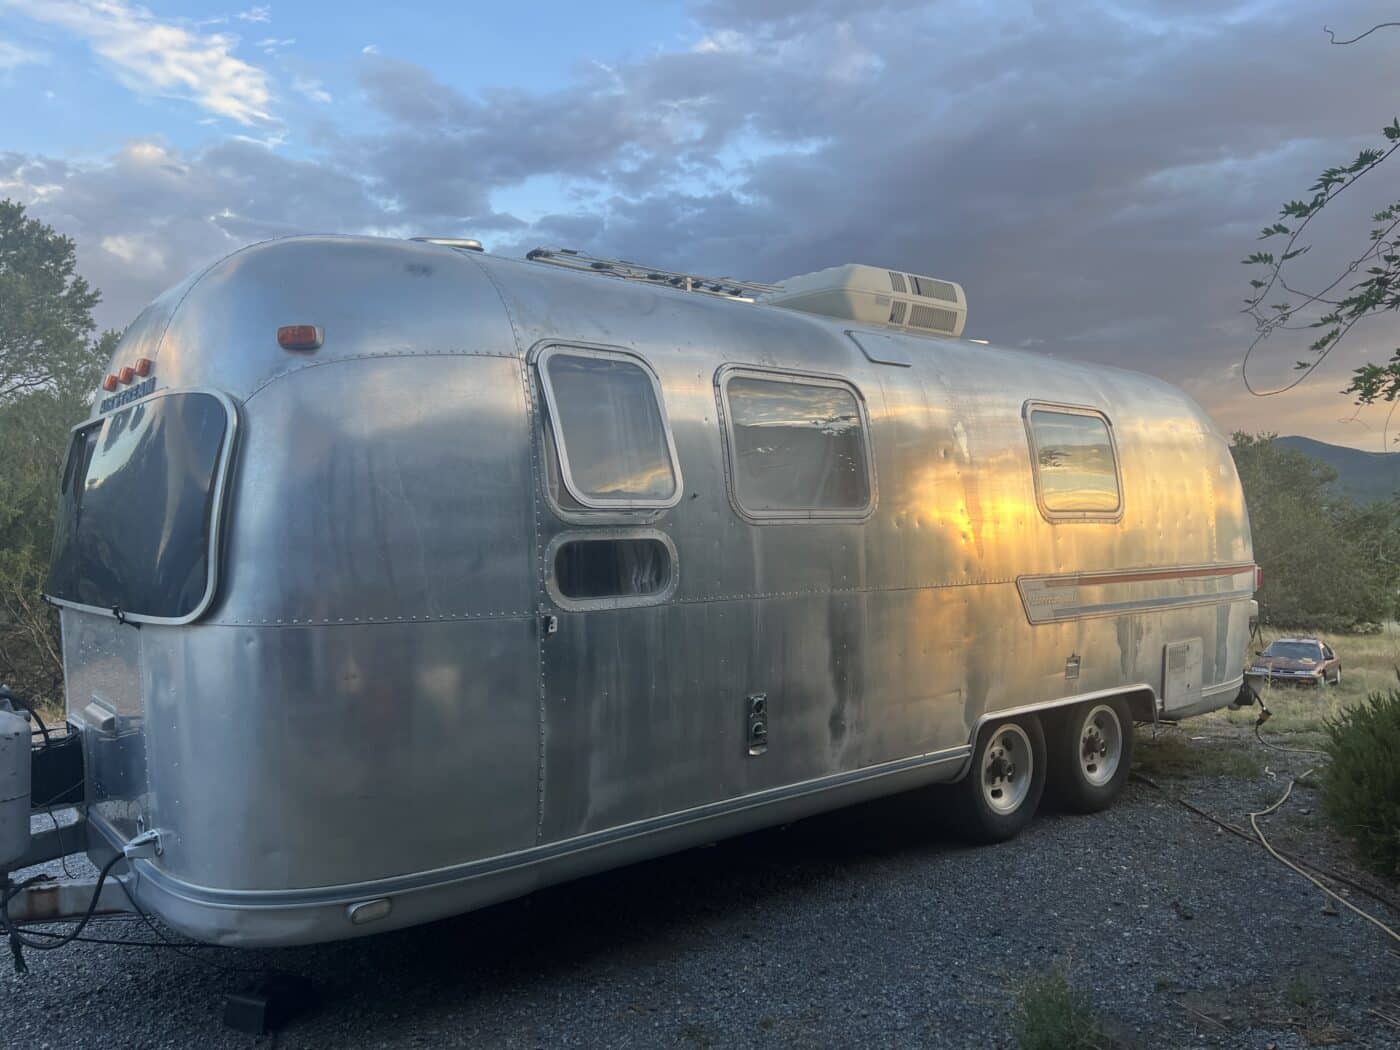 1978 25FT Land Yacht For Sale In Silver City, New Mexico - Airstream ...